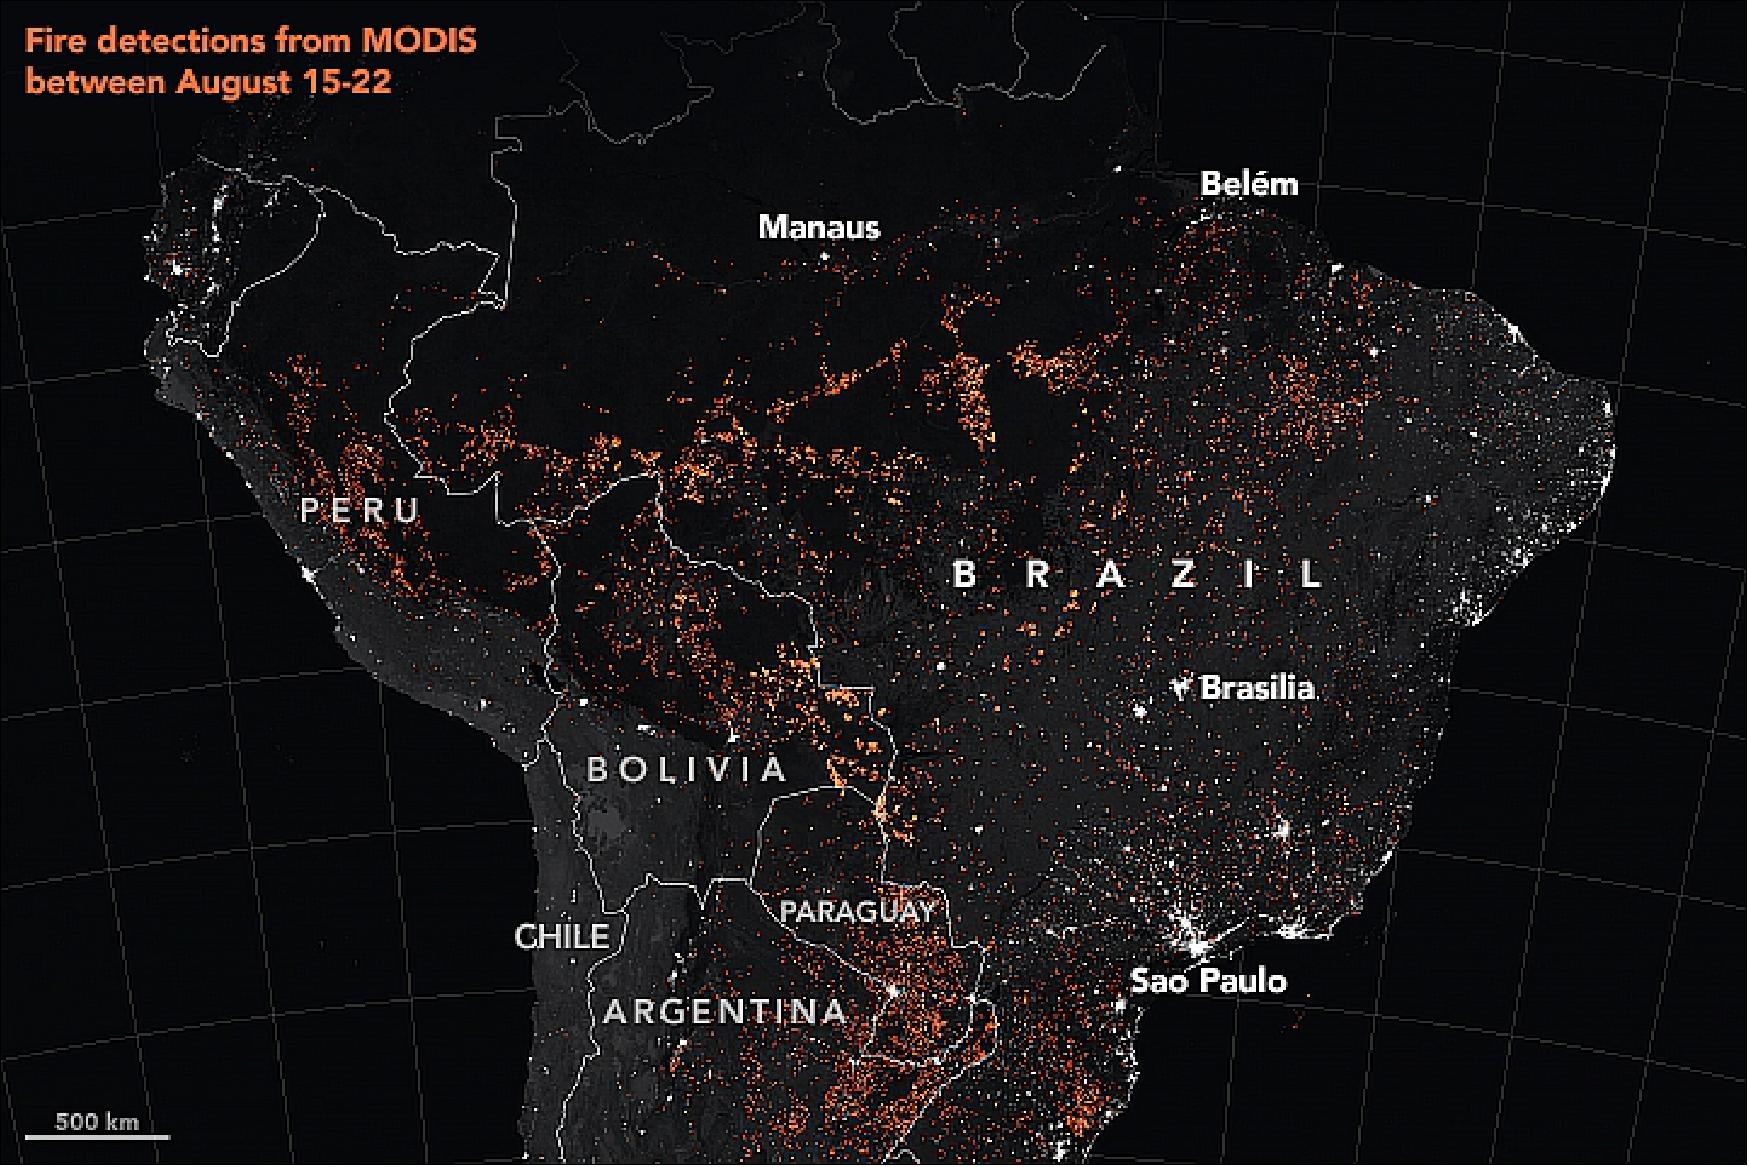 Figure 15: This map shows active fire detections in Brazil as observed by Aqua and Terra MODIS between August 15-22, 2019. The locations of the fires, shown in orange, have been overlain on nighttime imagery acquired by the VIIRS instrument on Suomi NPP. In these data, cities and towns appear white; forested areas appear black; and tropical savannas and woodland (known in Brazil as Cerrado) appear gray. Note that fire detections in the Brazilian states of Pará and Amazonas are concentrated in bands along the highways BR-163 and BR-230 (image credit: NASA Earth Observatory, image by Joshua Stevens, using MODIS data from NASA EOSDIS/LANCE and GIBS/Worldview, Fire Information for Resource Management System (FIRMS) data from NASA EOSDIS, and data from the Global Fire Emissions Database (GFED). Story by Adam Voiland, with information from Douglas Morton)